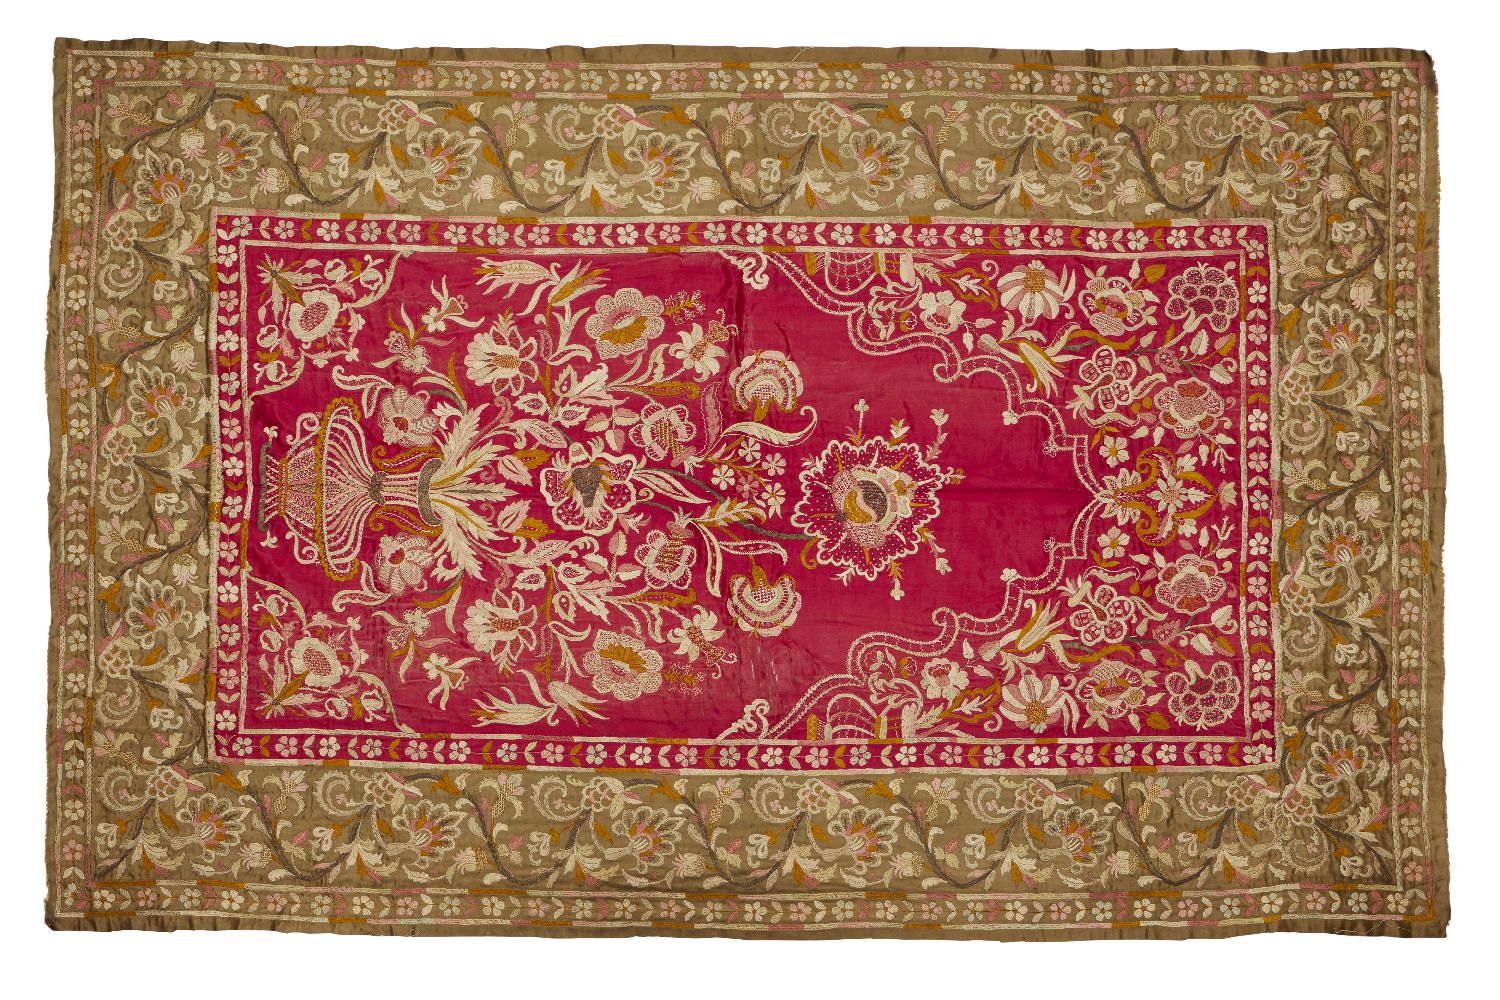 An Ottoman embroidered mihrab panel, Turkey, late 18th-early 19th century, the central rectangular